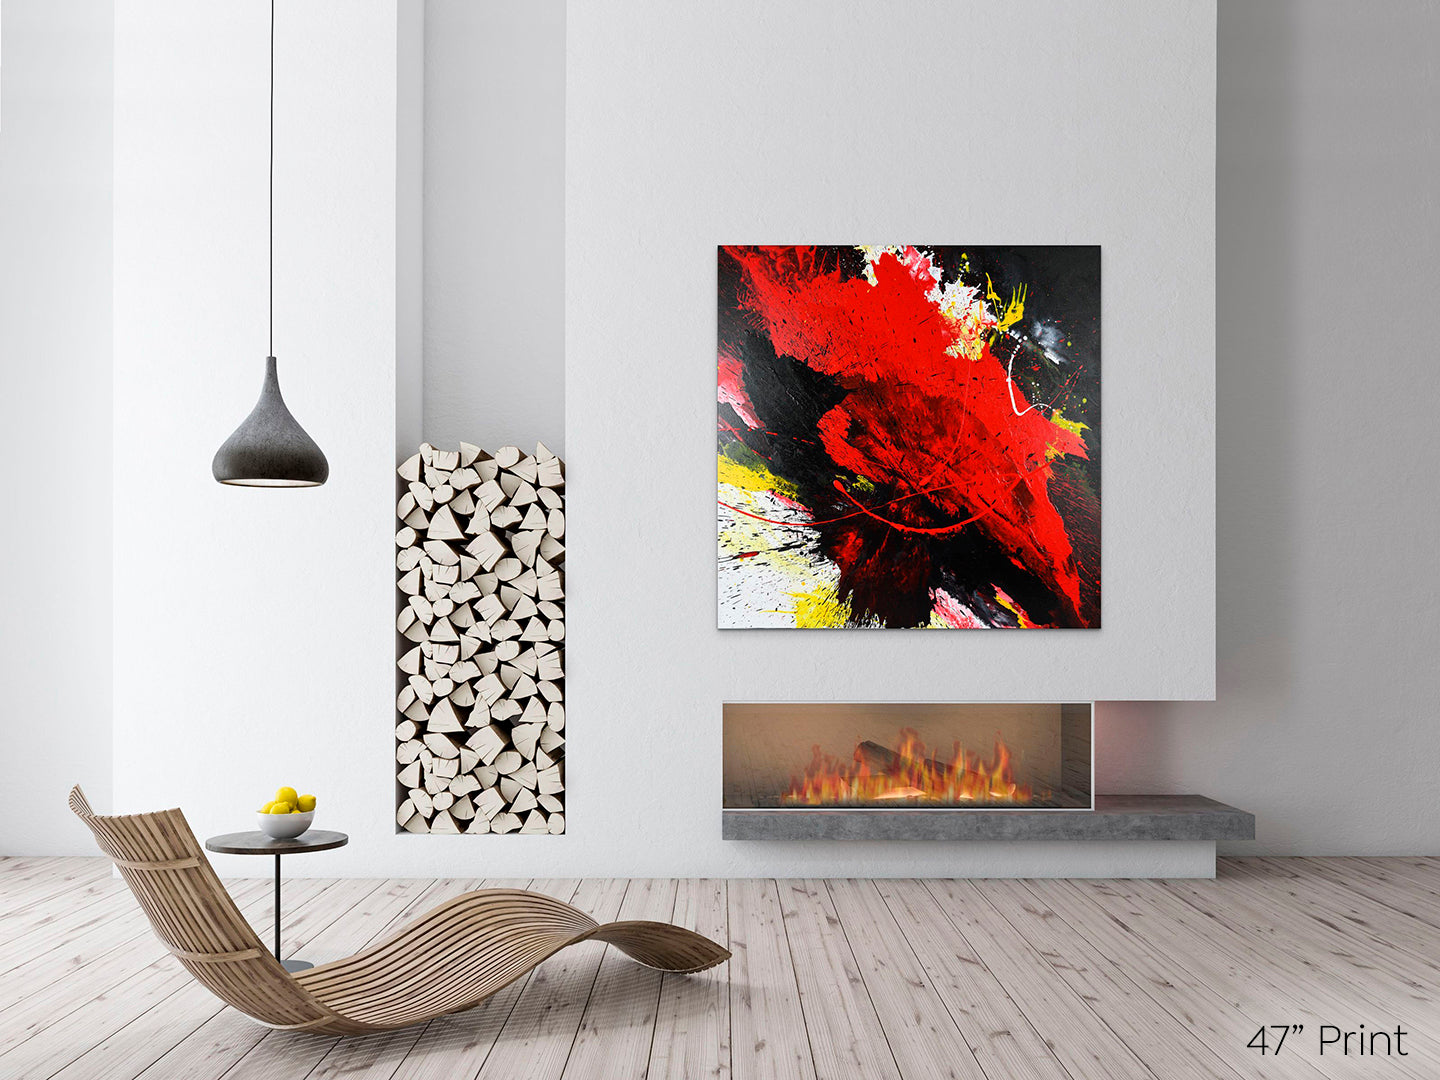 Abstract, expressionism, acrylic 47” giclee print: tumultuous explosion of bright red, black, yellow and white on a pale grey wall above a fireplace, minimalism contemporary room.